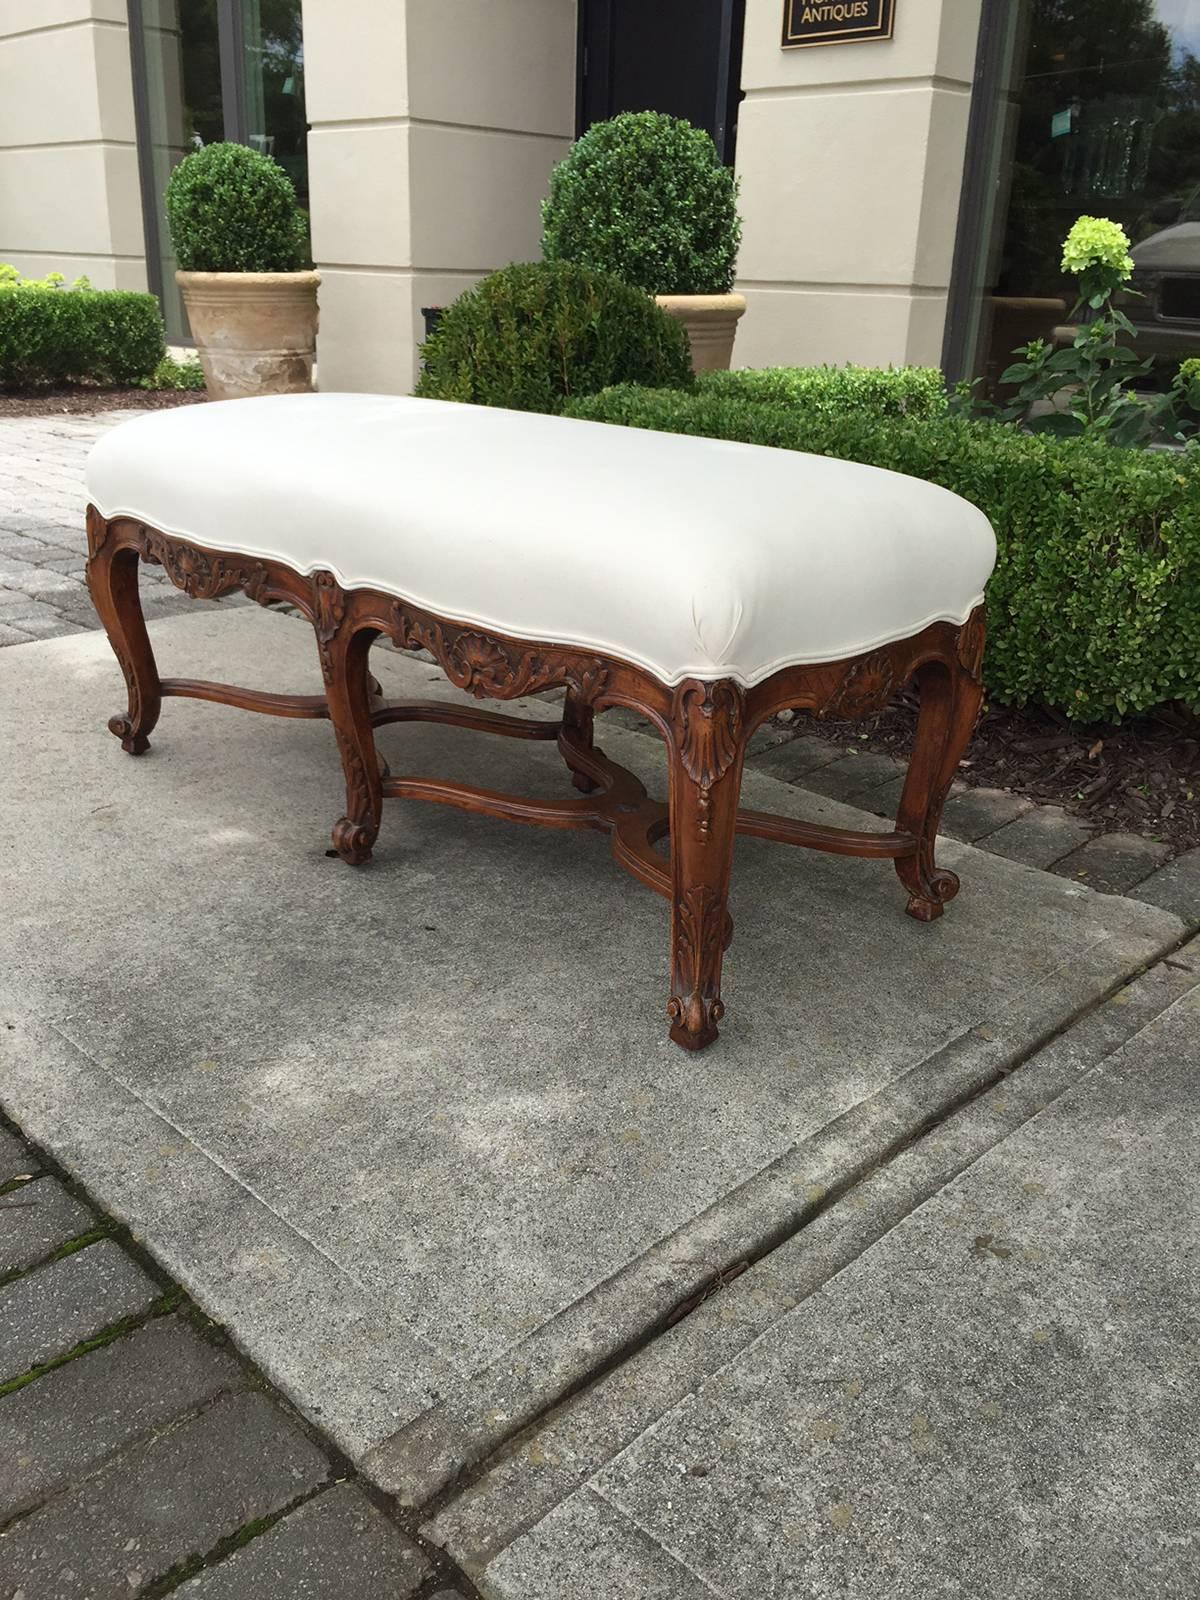 19th century French Regence bench, beautifully carved.